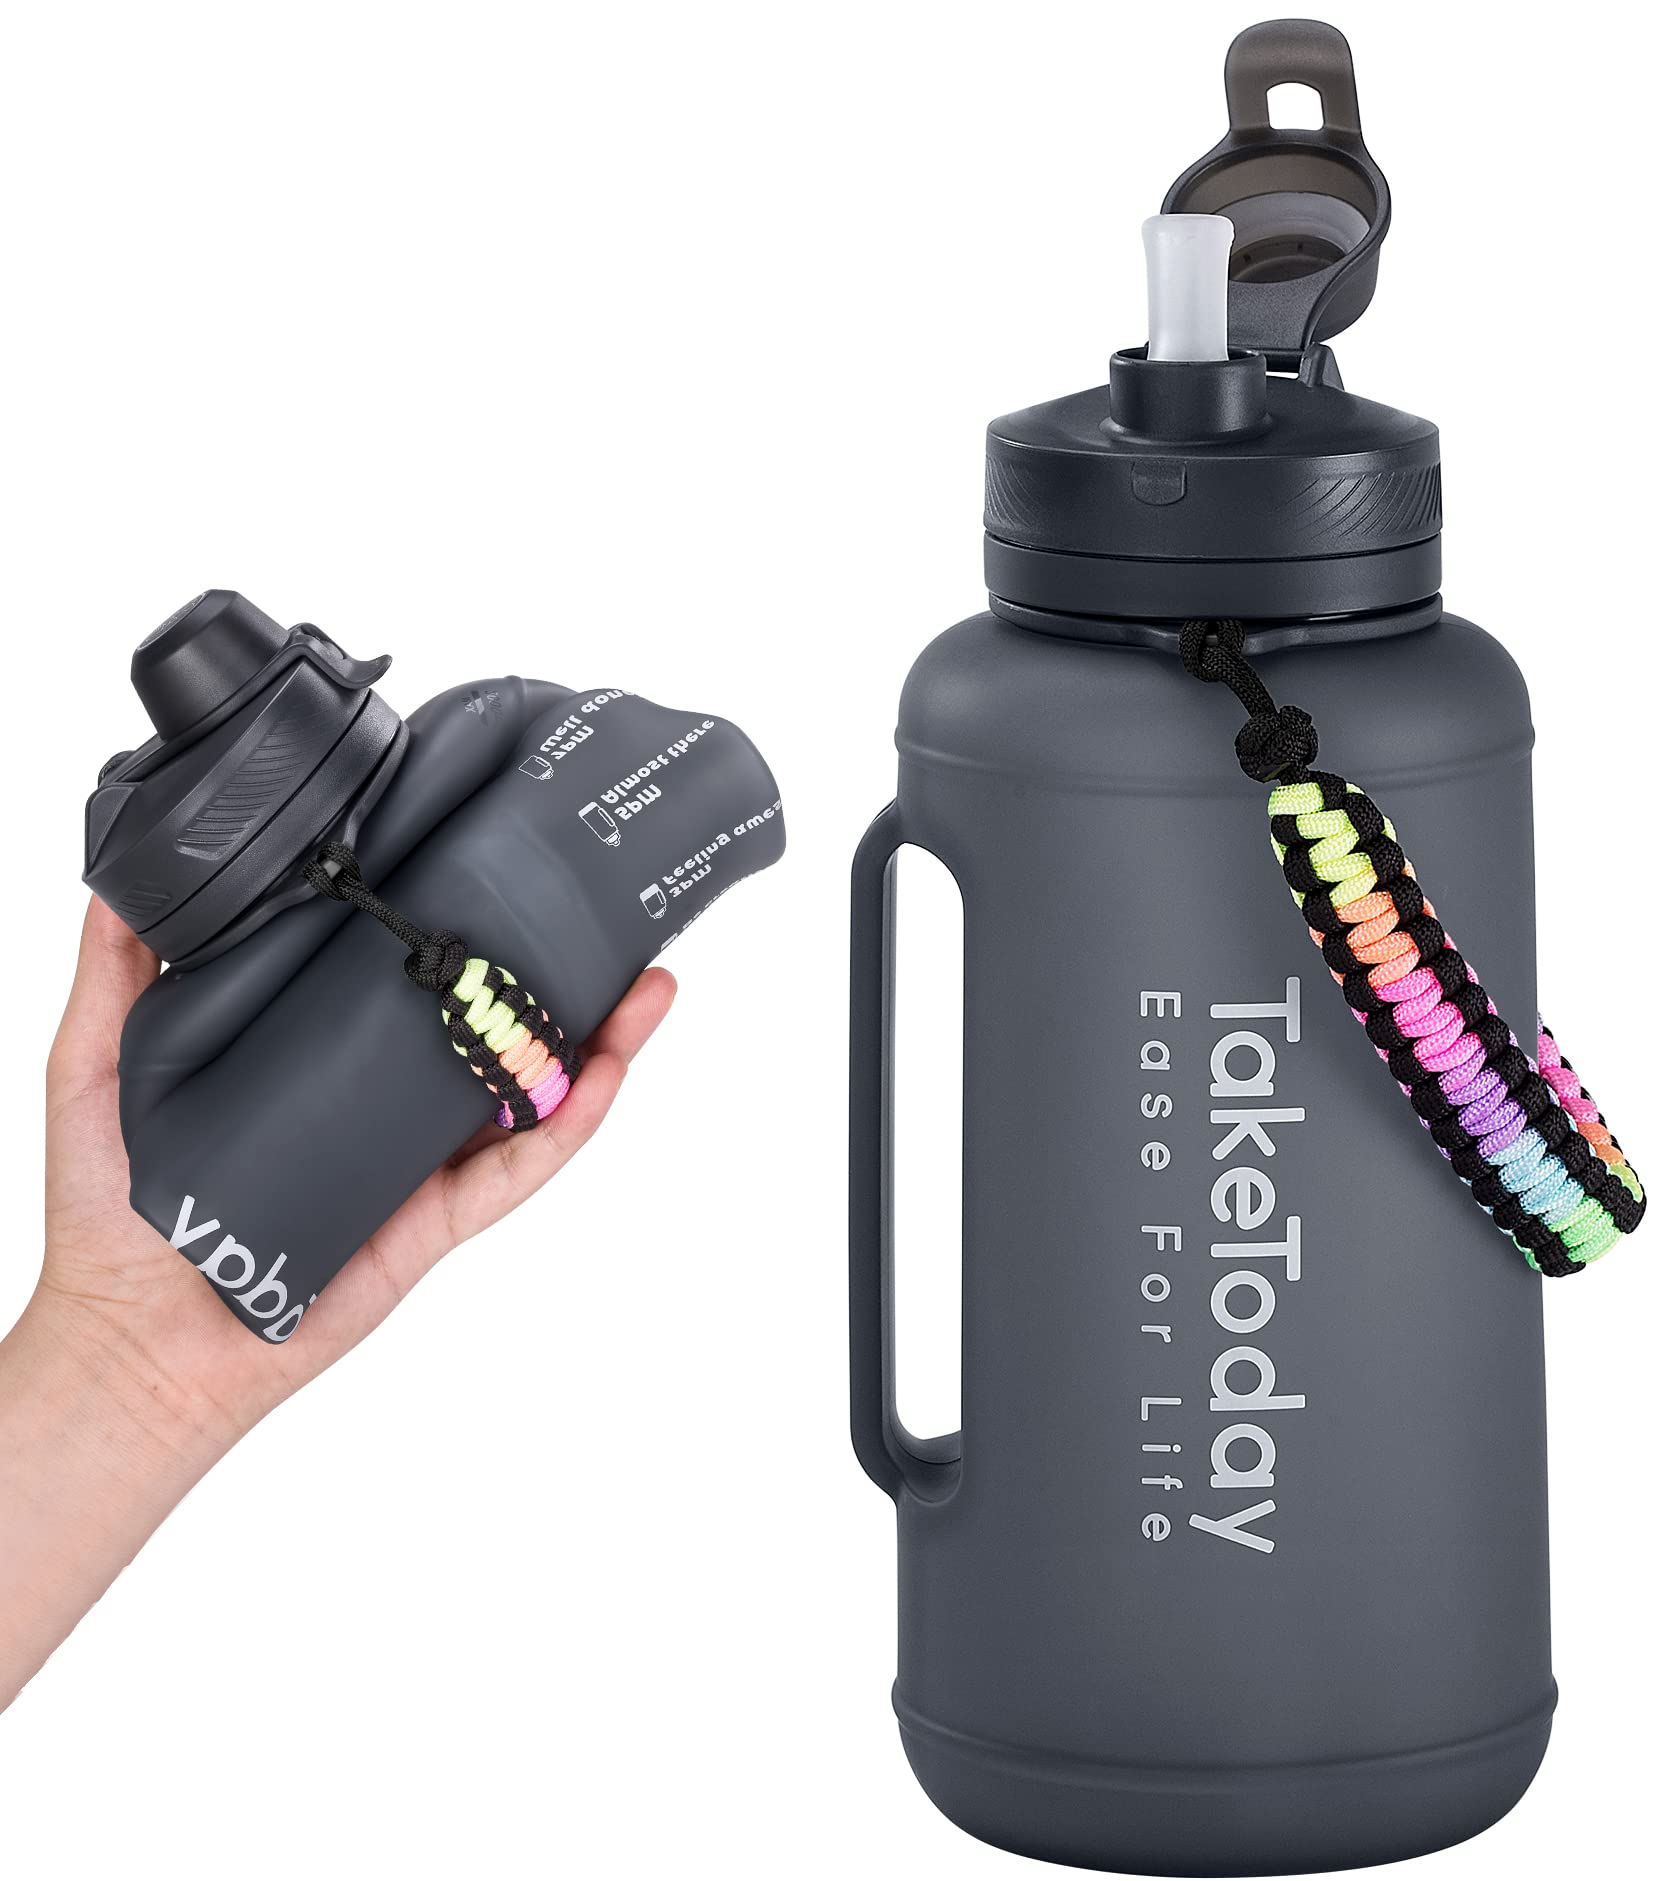 TakeToday 68 oz Collapsible Water Bottles with Straw, Half Gallon Water Bottle with Motivational Time Marker, Large Reusable Silicone Water Jug with Paracord Handle $21.59